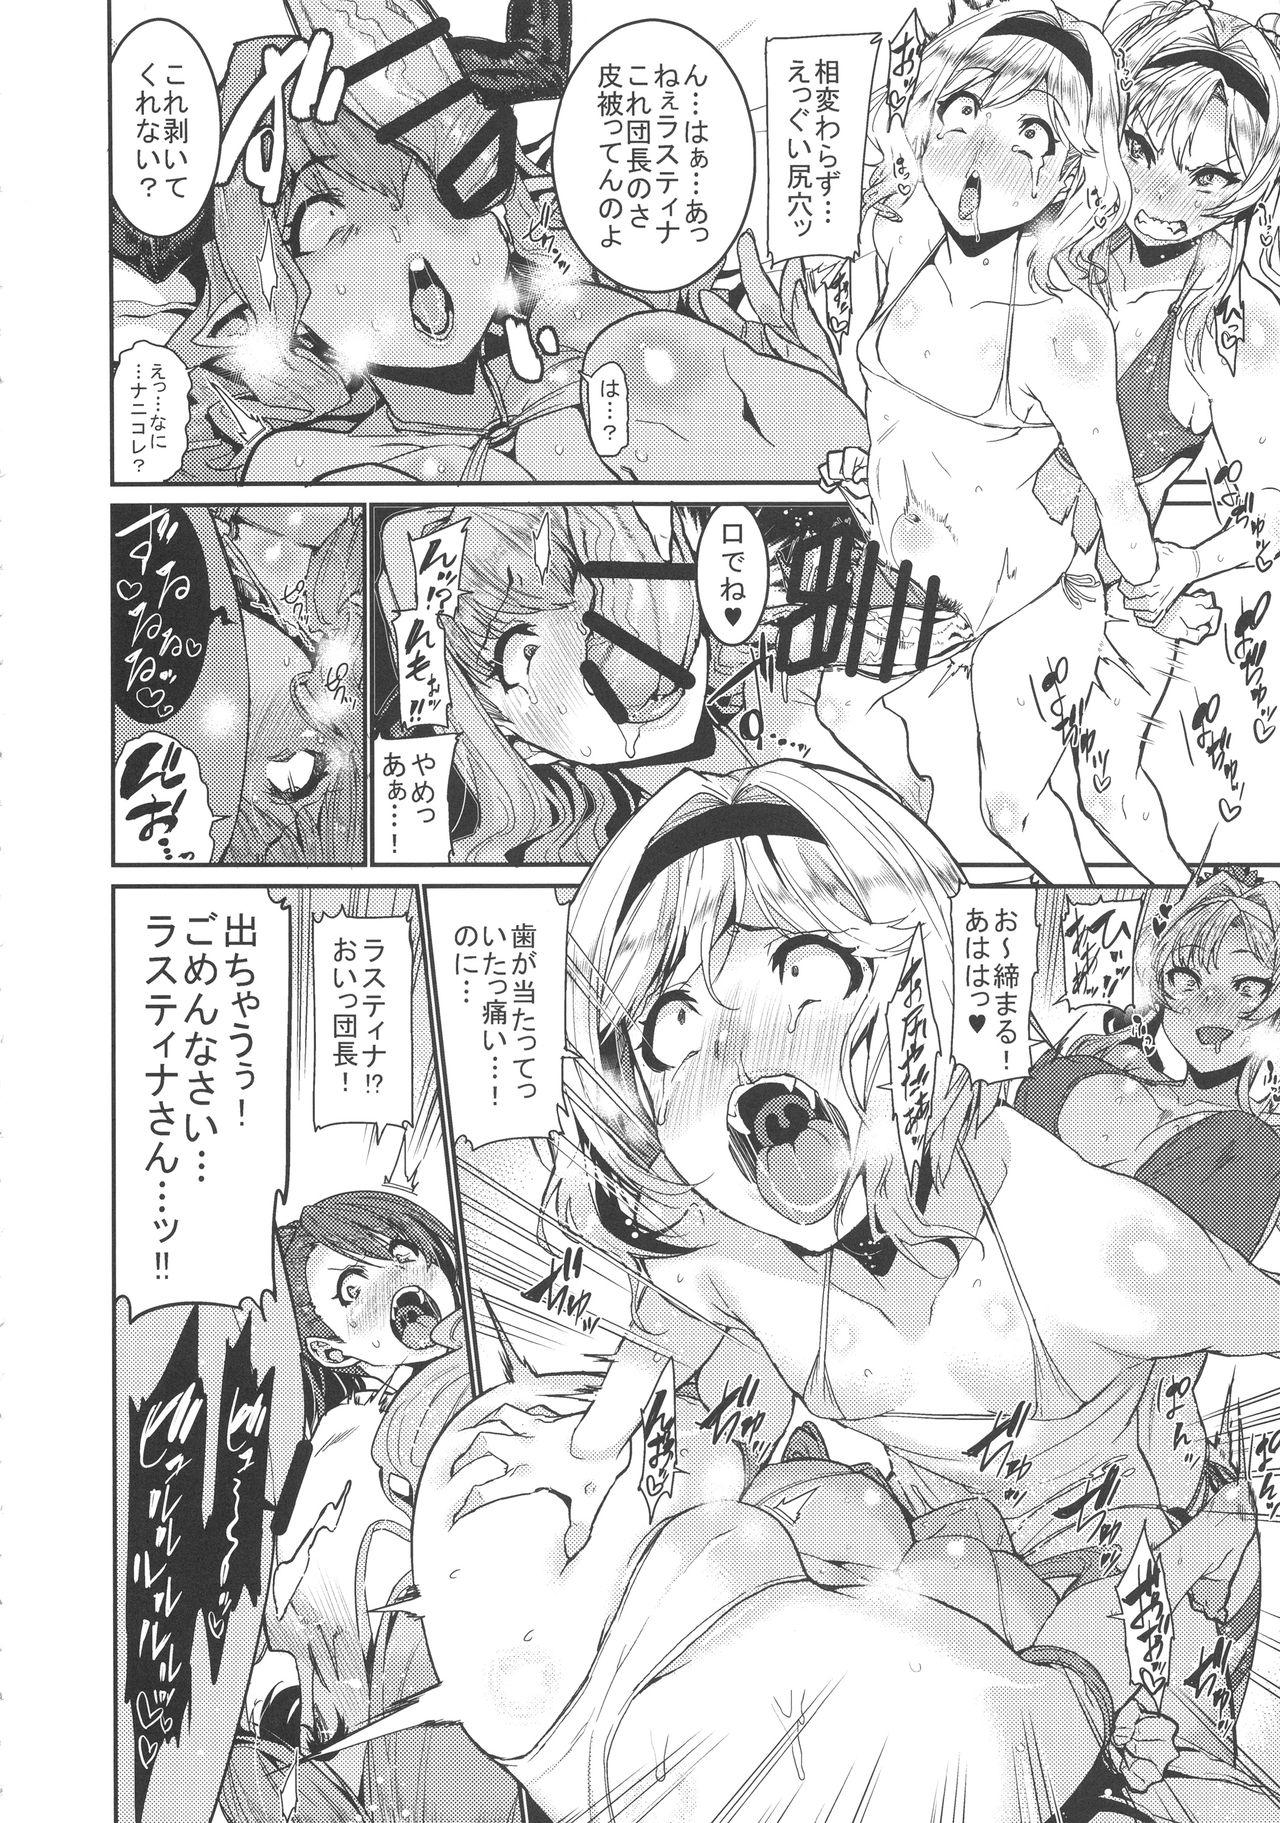 Scandal Be covered, be smeared - Granblue fantasy Cams - Page 12